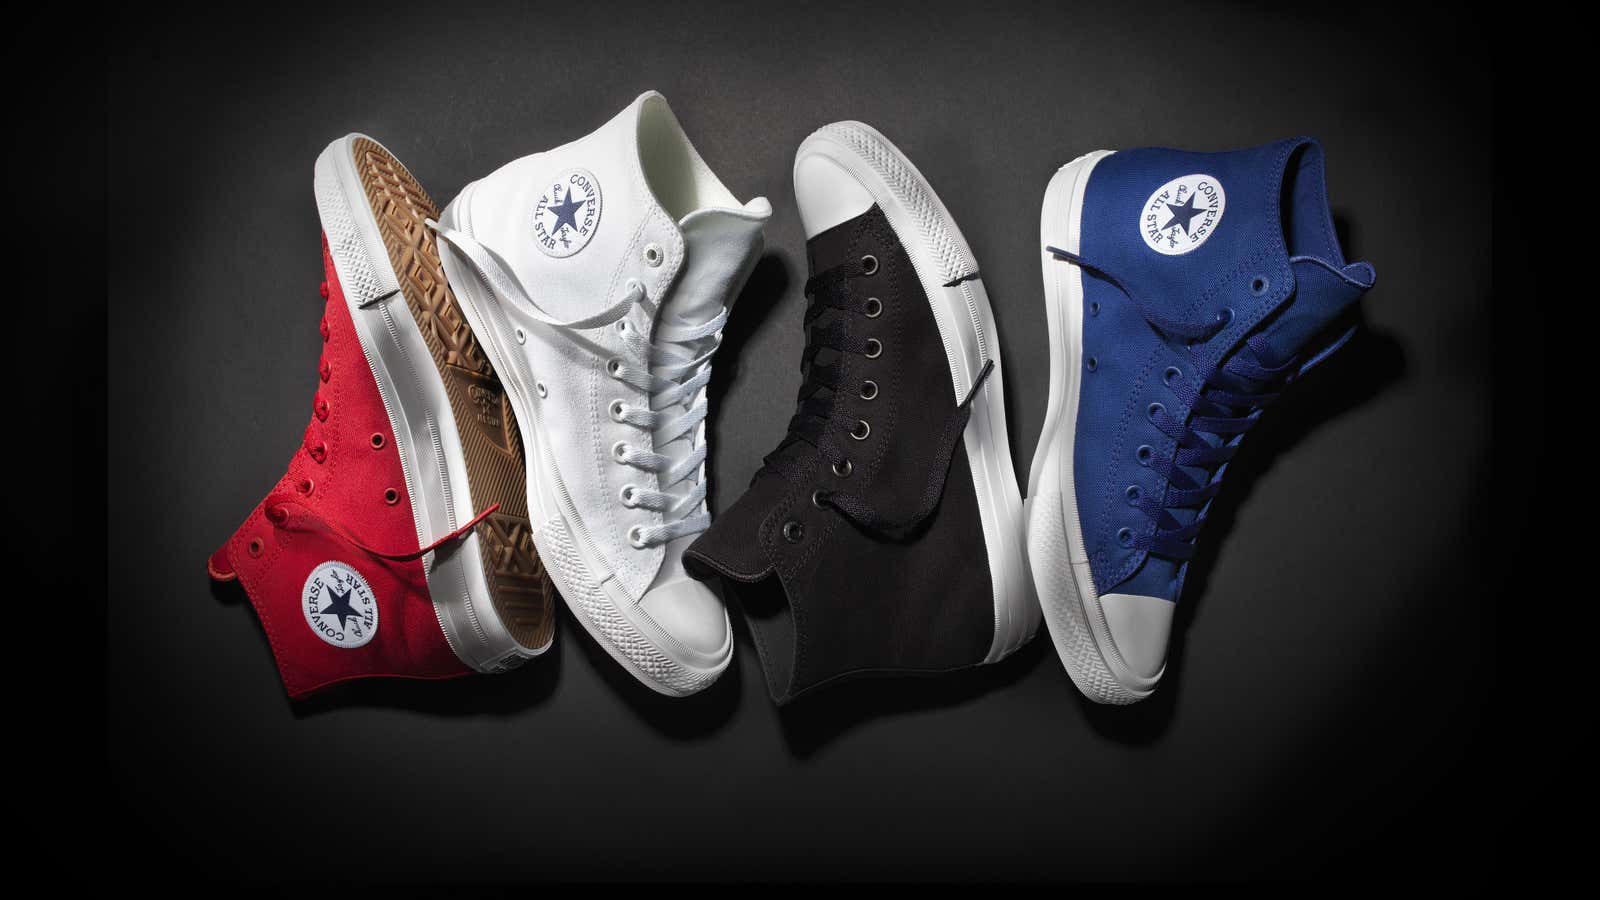 The new Chuck Taylor All Star may look the same, but it isn’t.